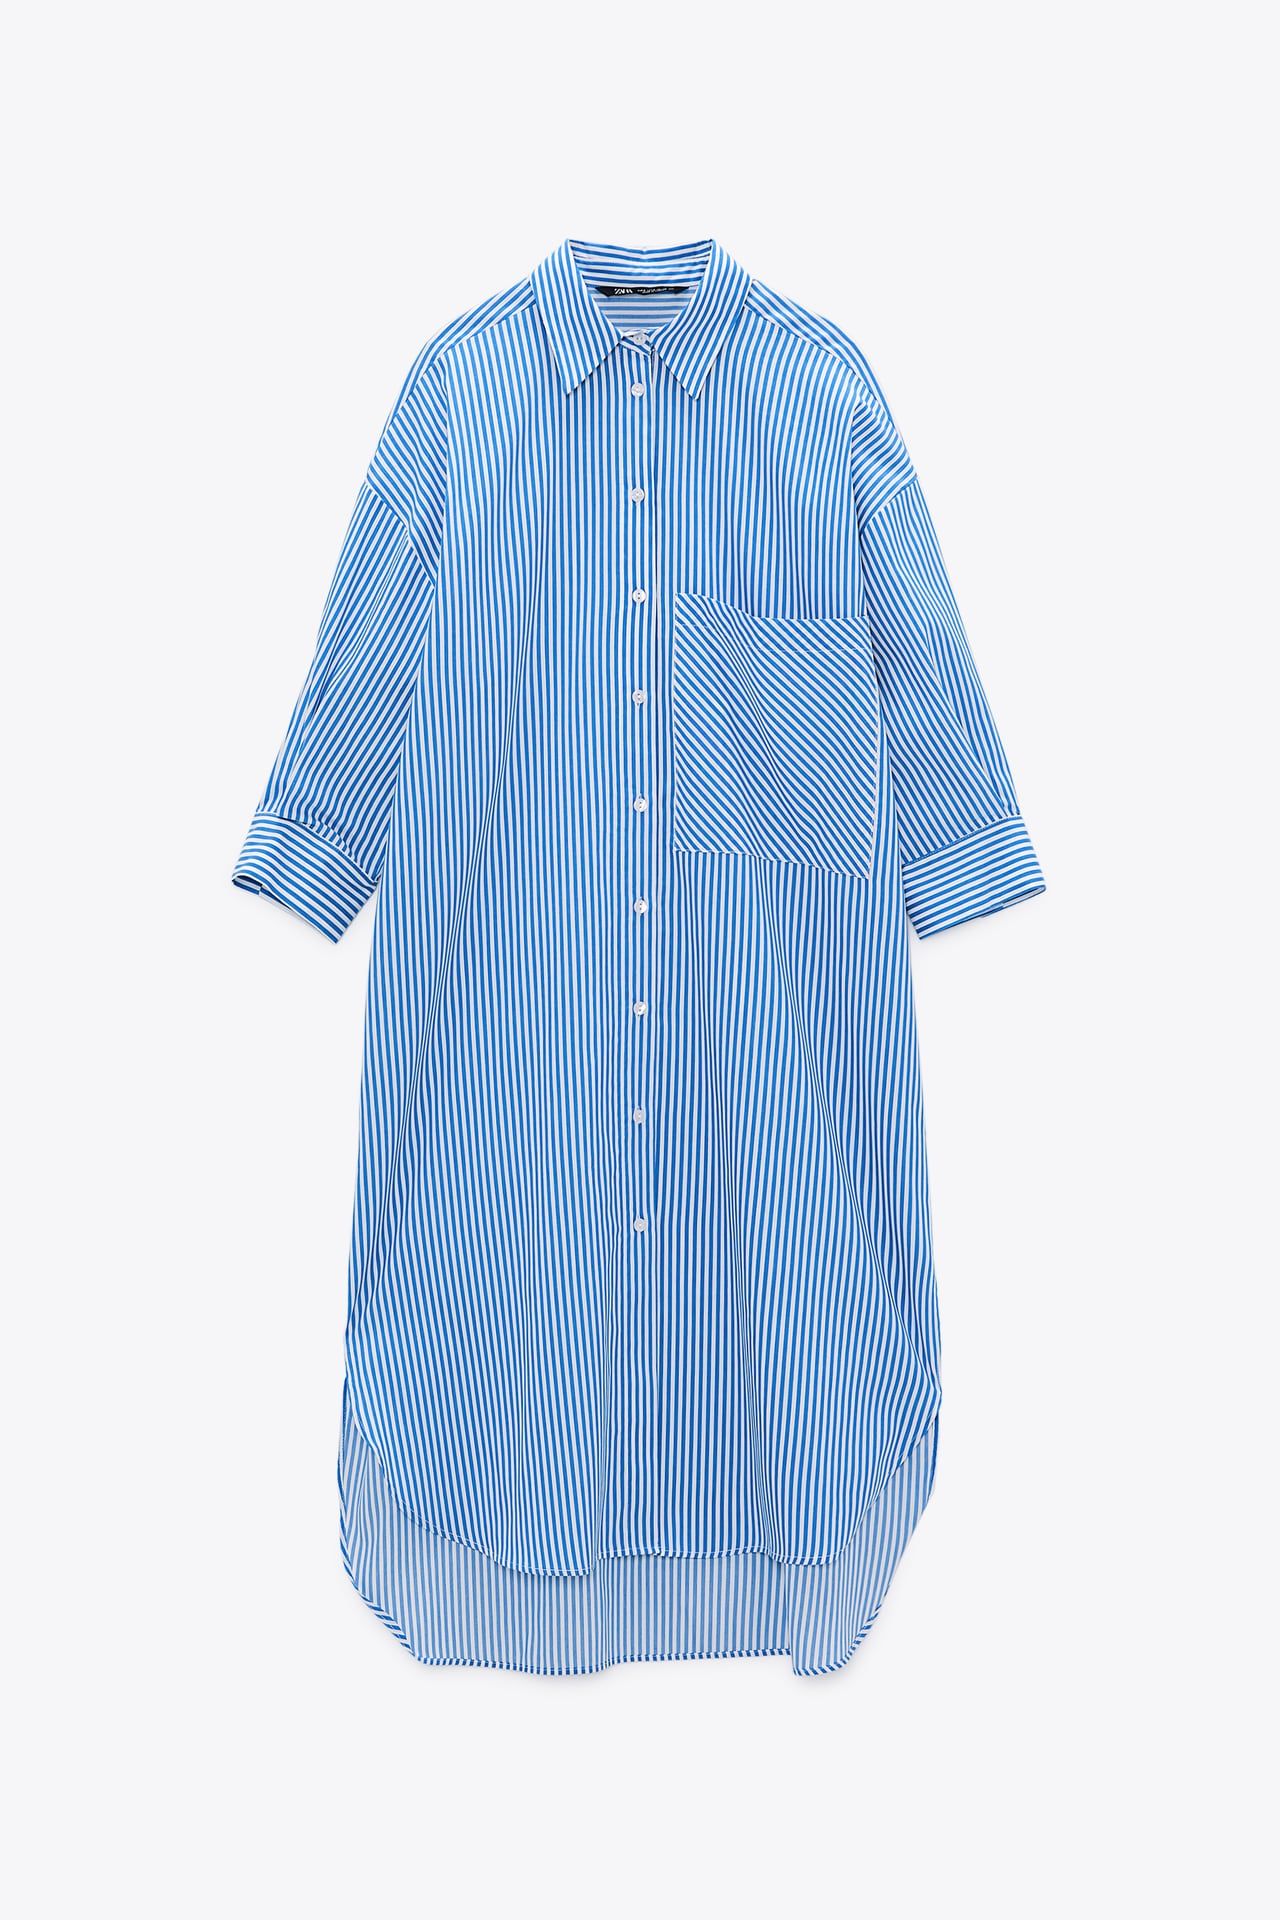 16 Of The Best Shirt Dresses For 2021 ...